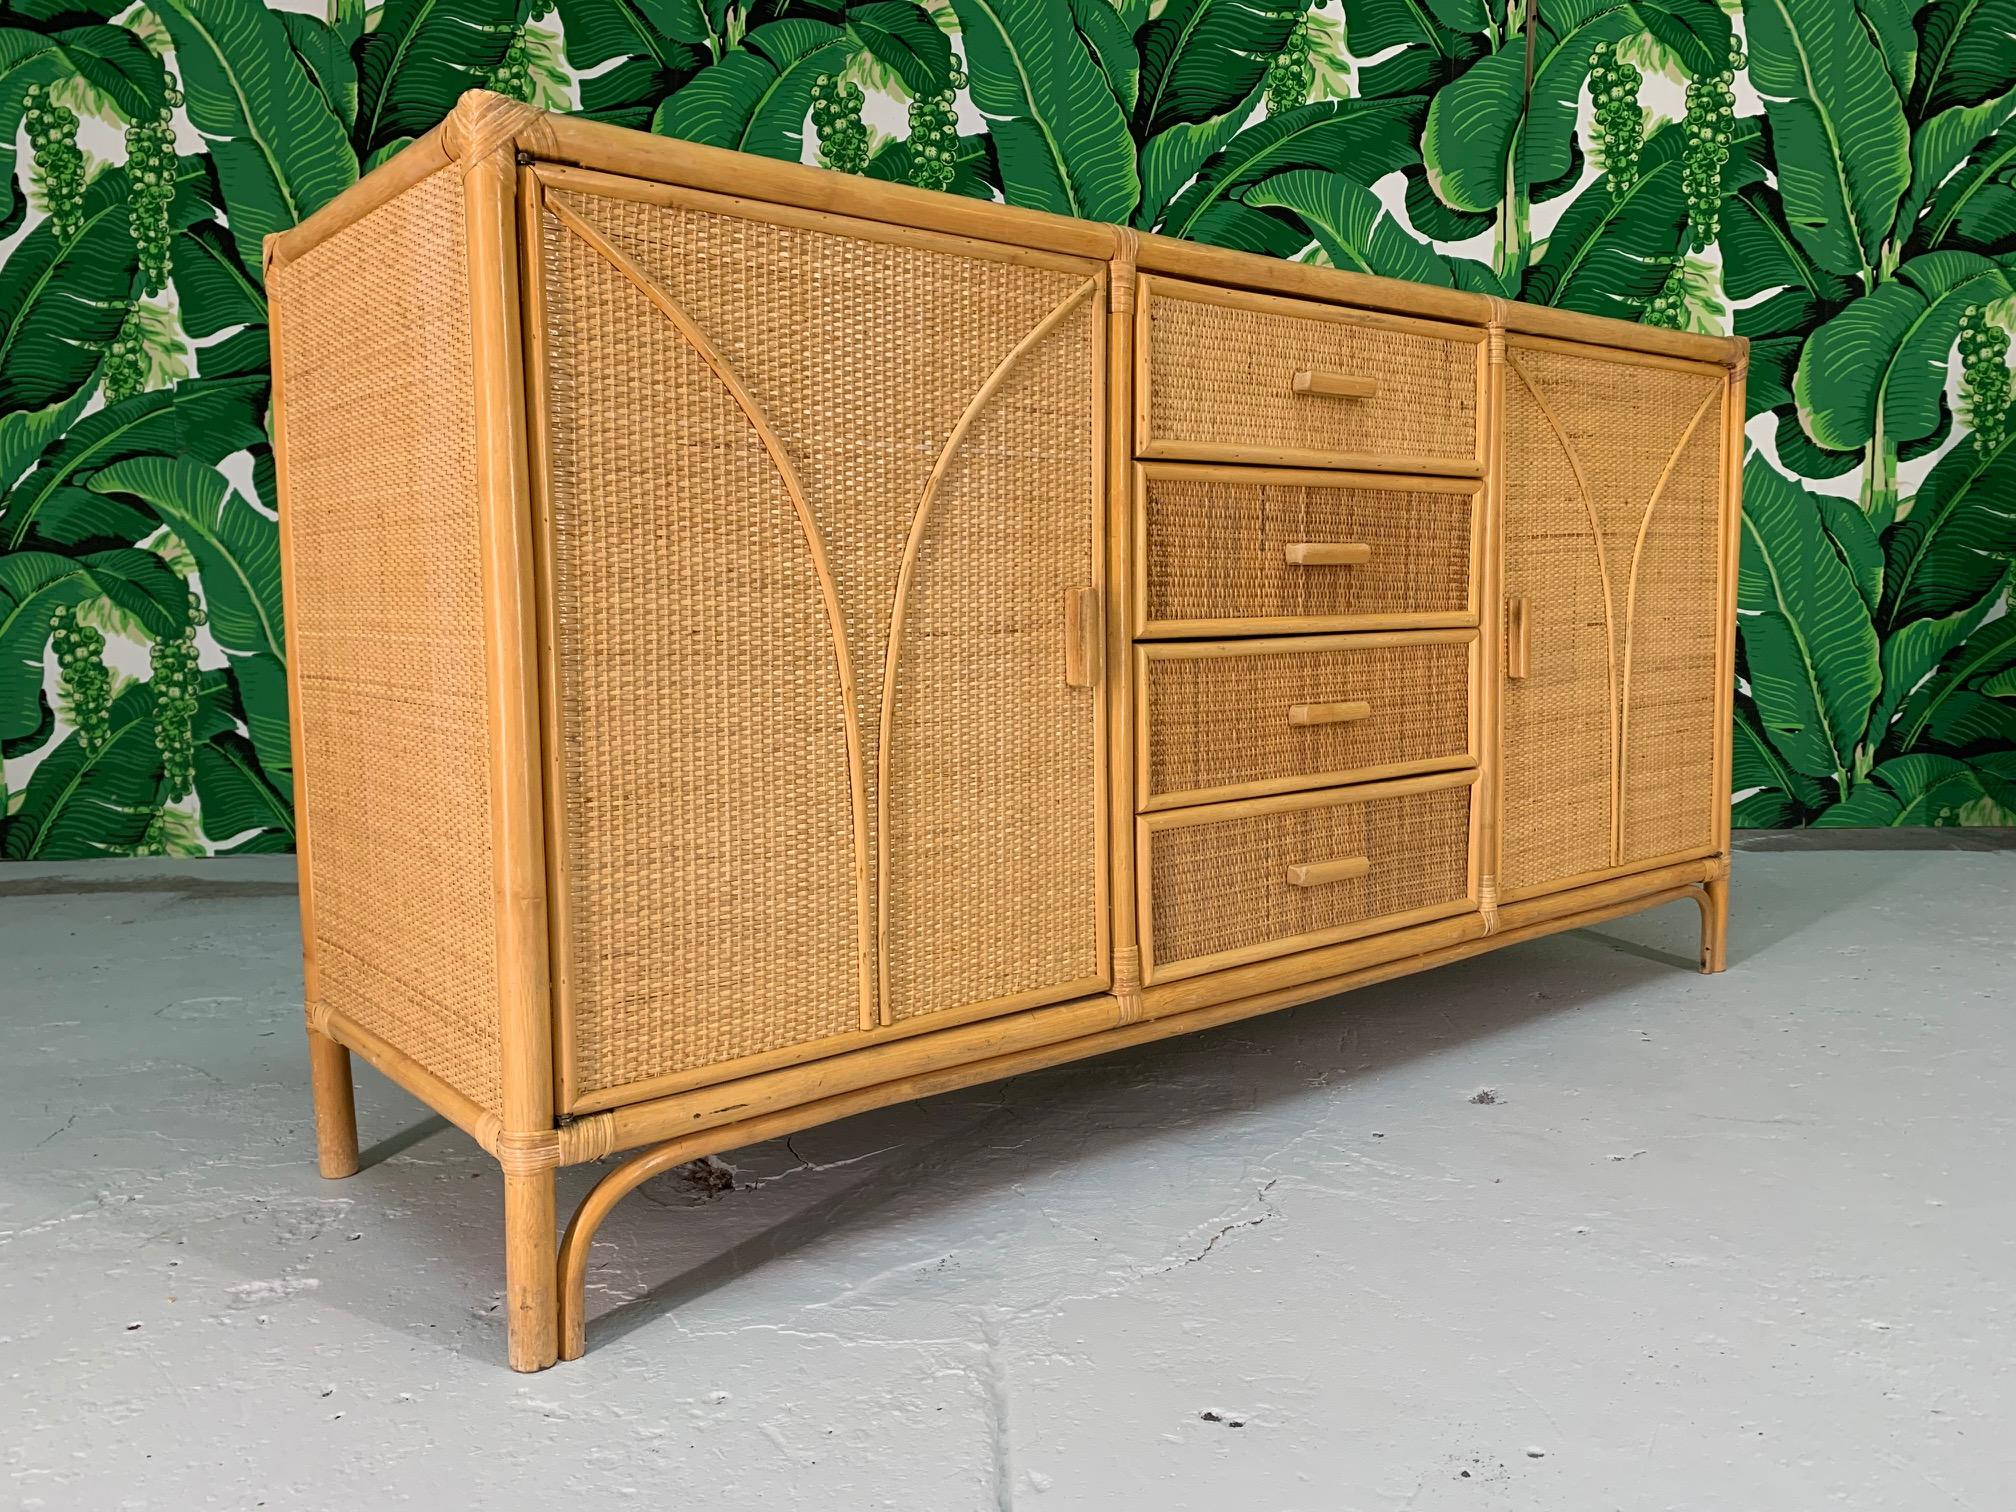 Vintage tiki-style dresser features rattan construction and woven rattan veneers. Solid construction and minimal imperfections consistent with age.